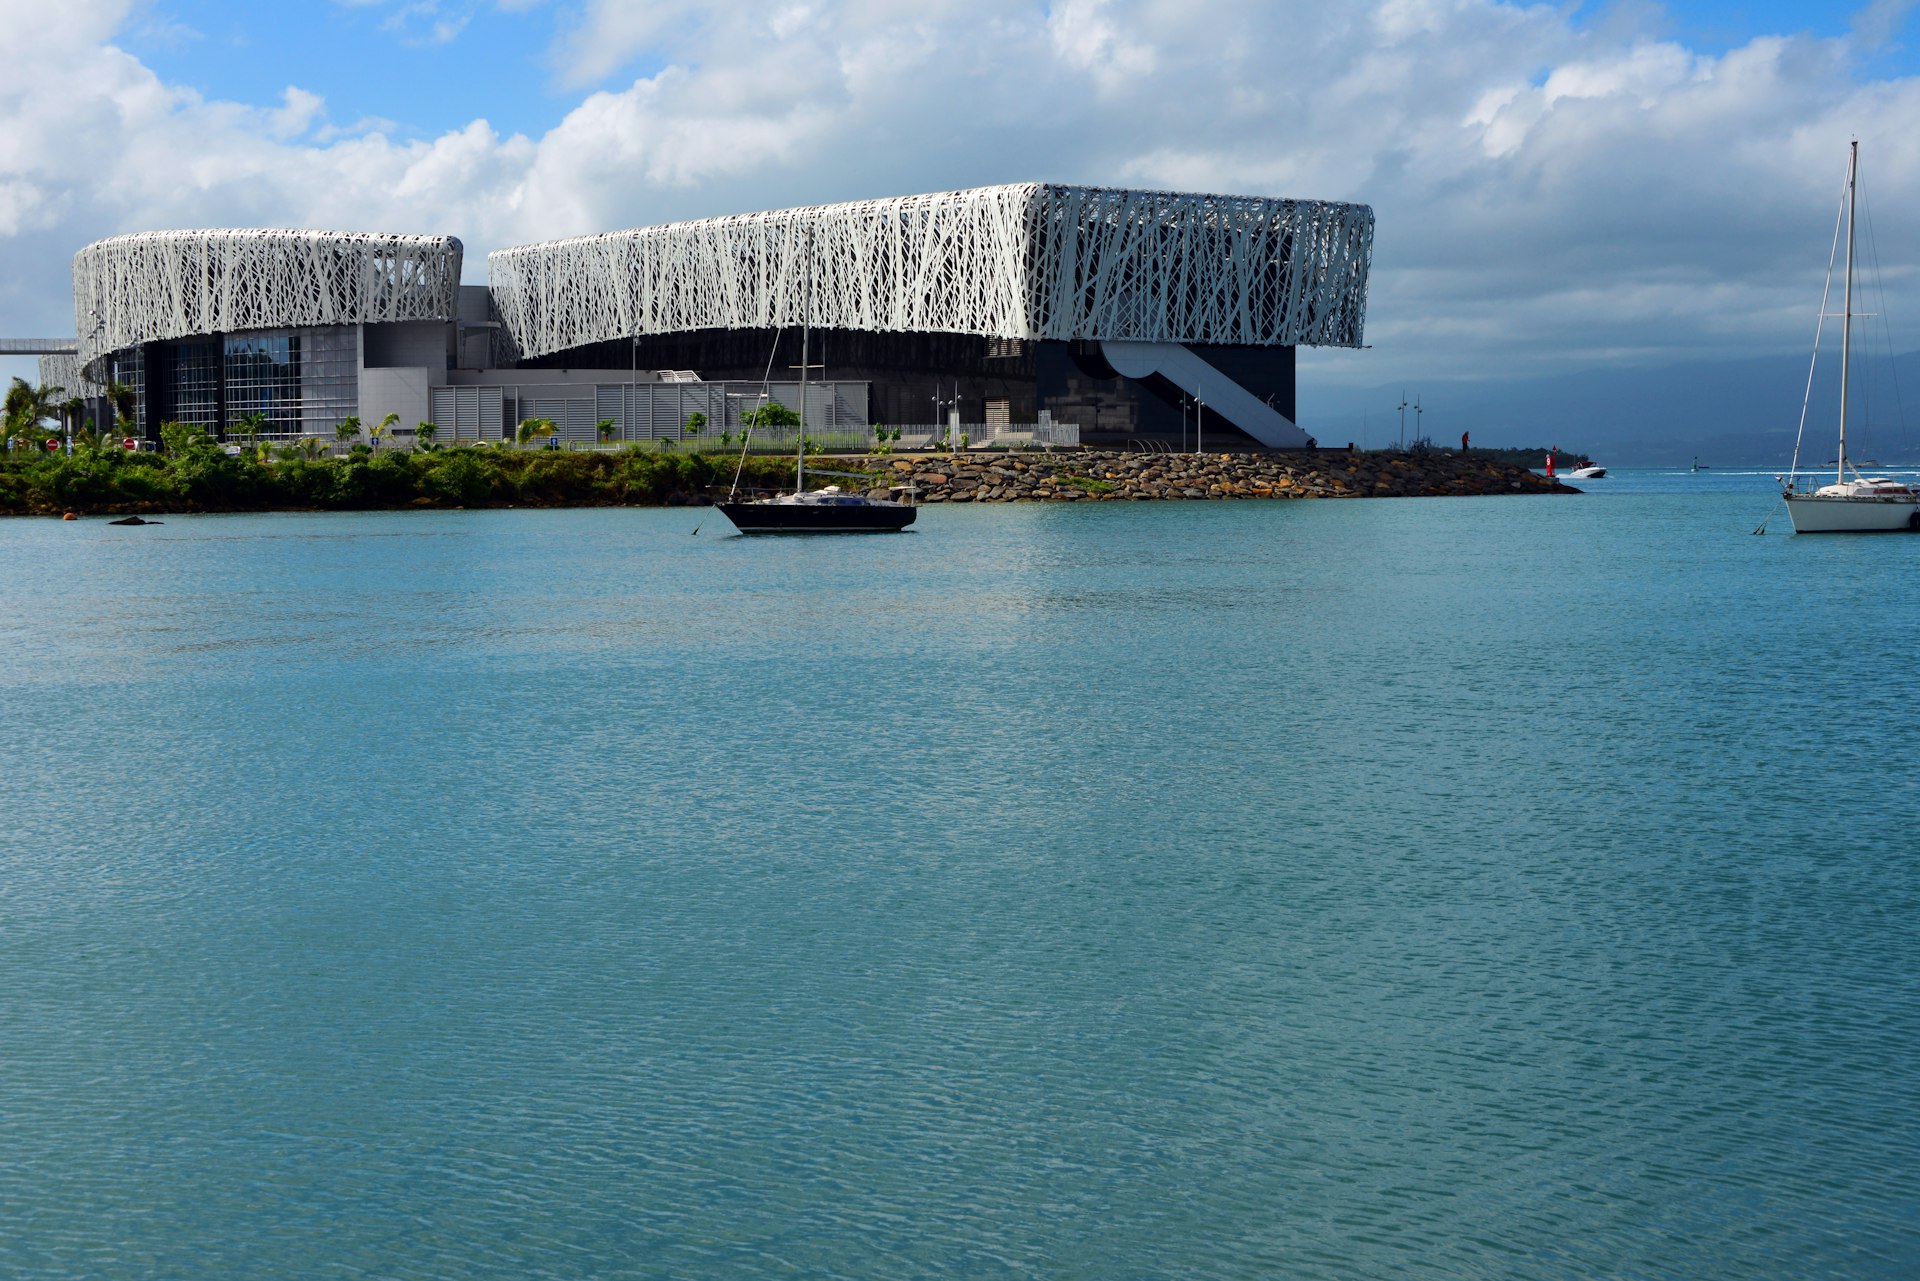 Exterior of the Caribbean Center for Expressions and Memory of the Trade and Slavery as seen from the sea